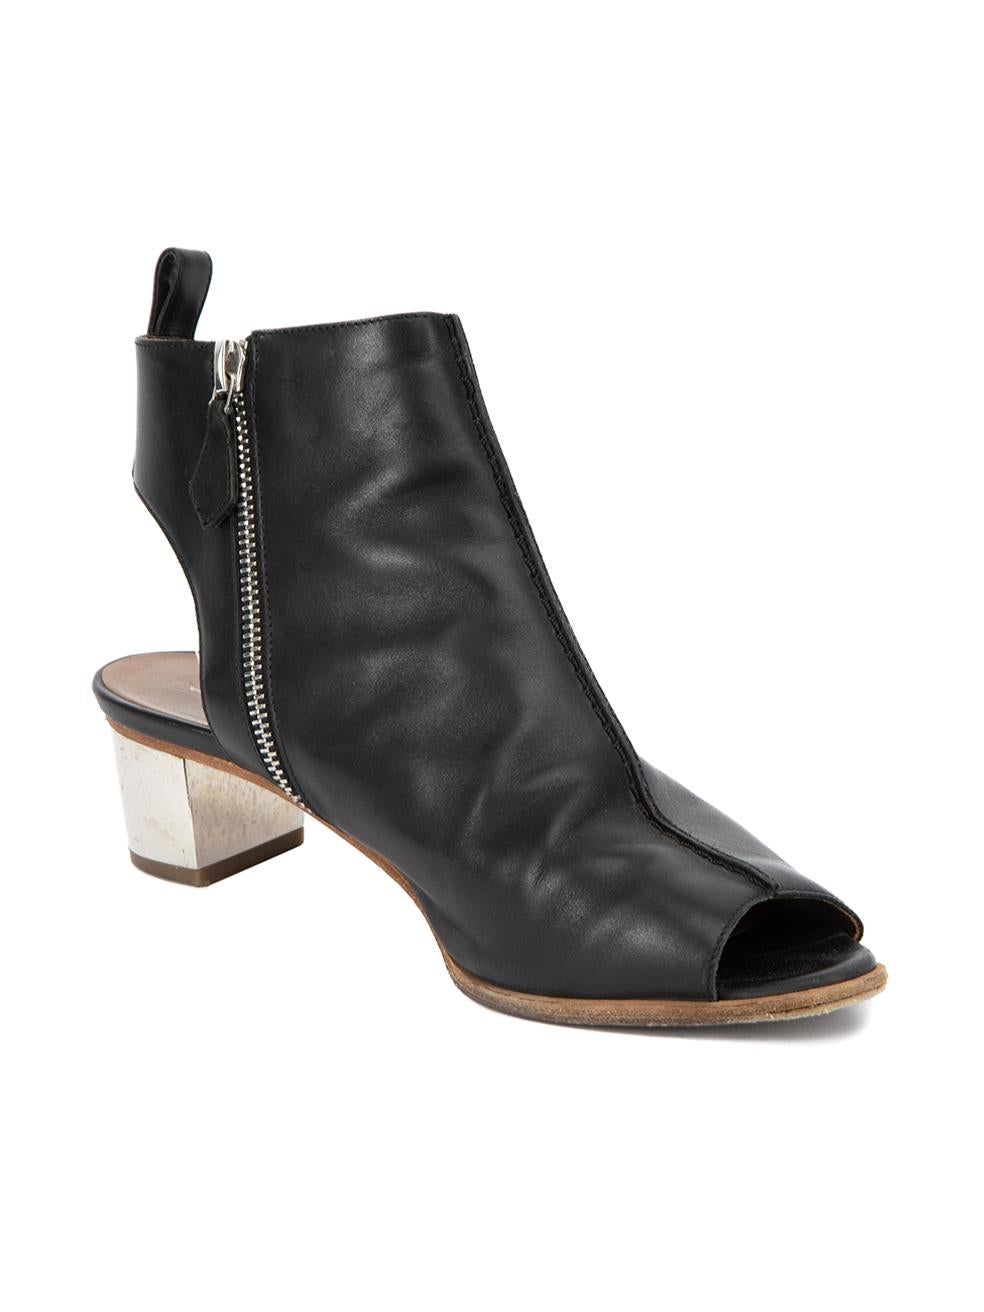 CONDITION is Good. Minor wear to boots is evident. Light wear to the leather exterior which has naturally folded from use. There is also wear midsole and heel block which is scuffed on this used Hermès designer resale item.   Details  Black Leather